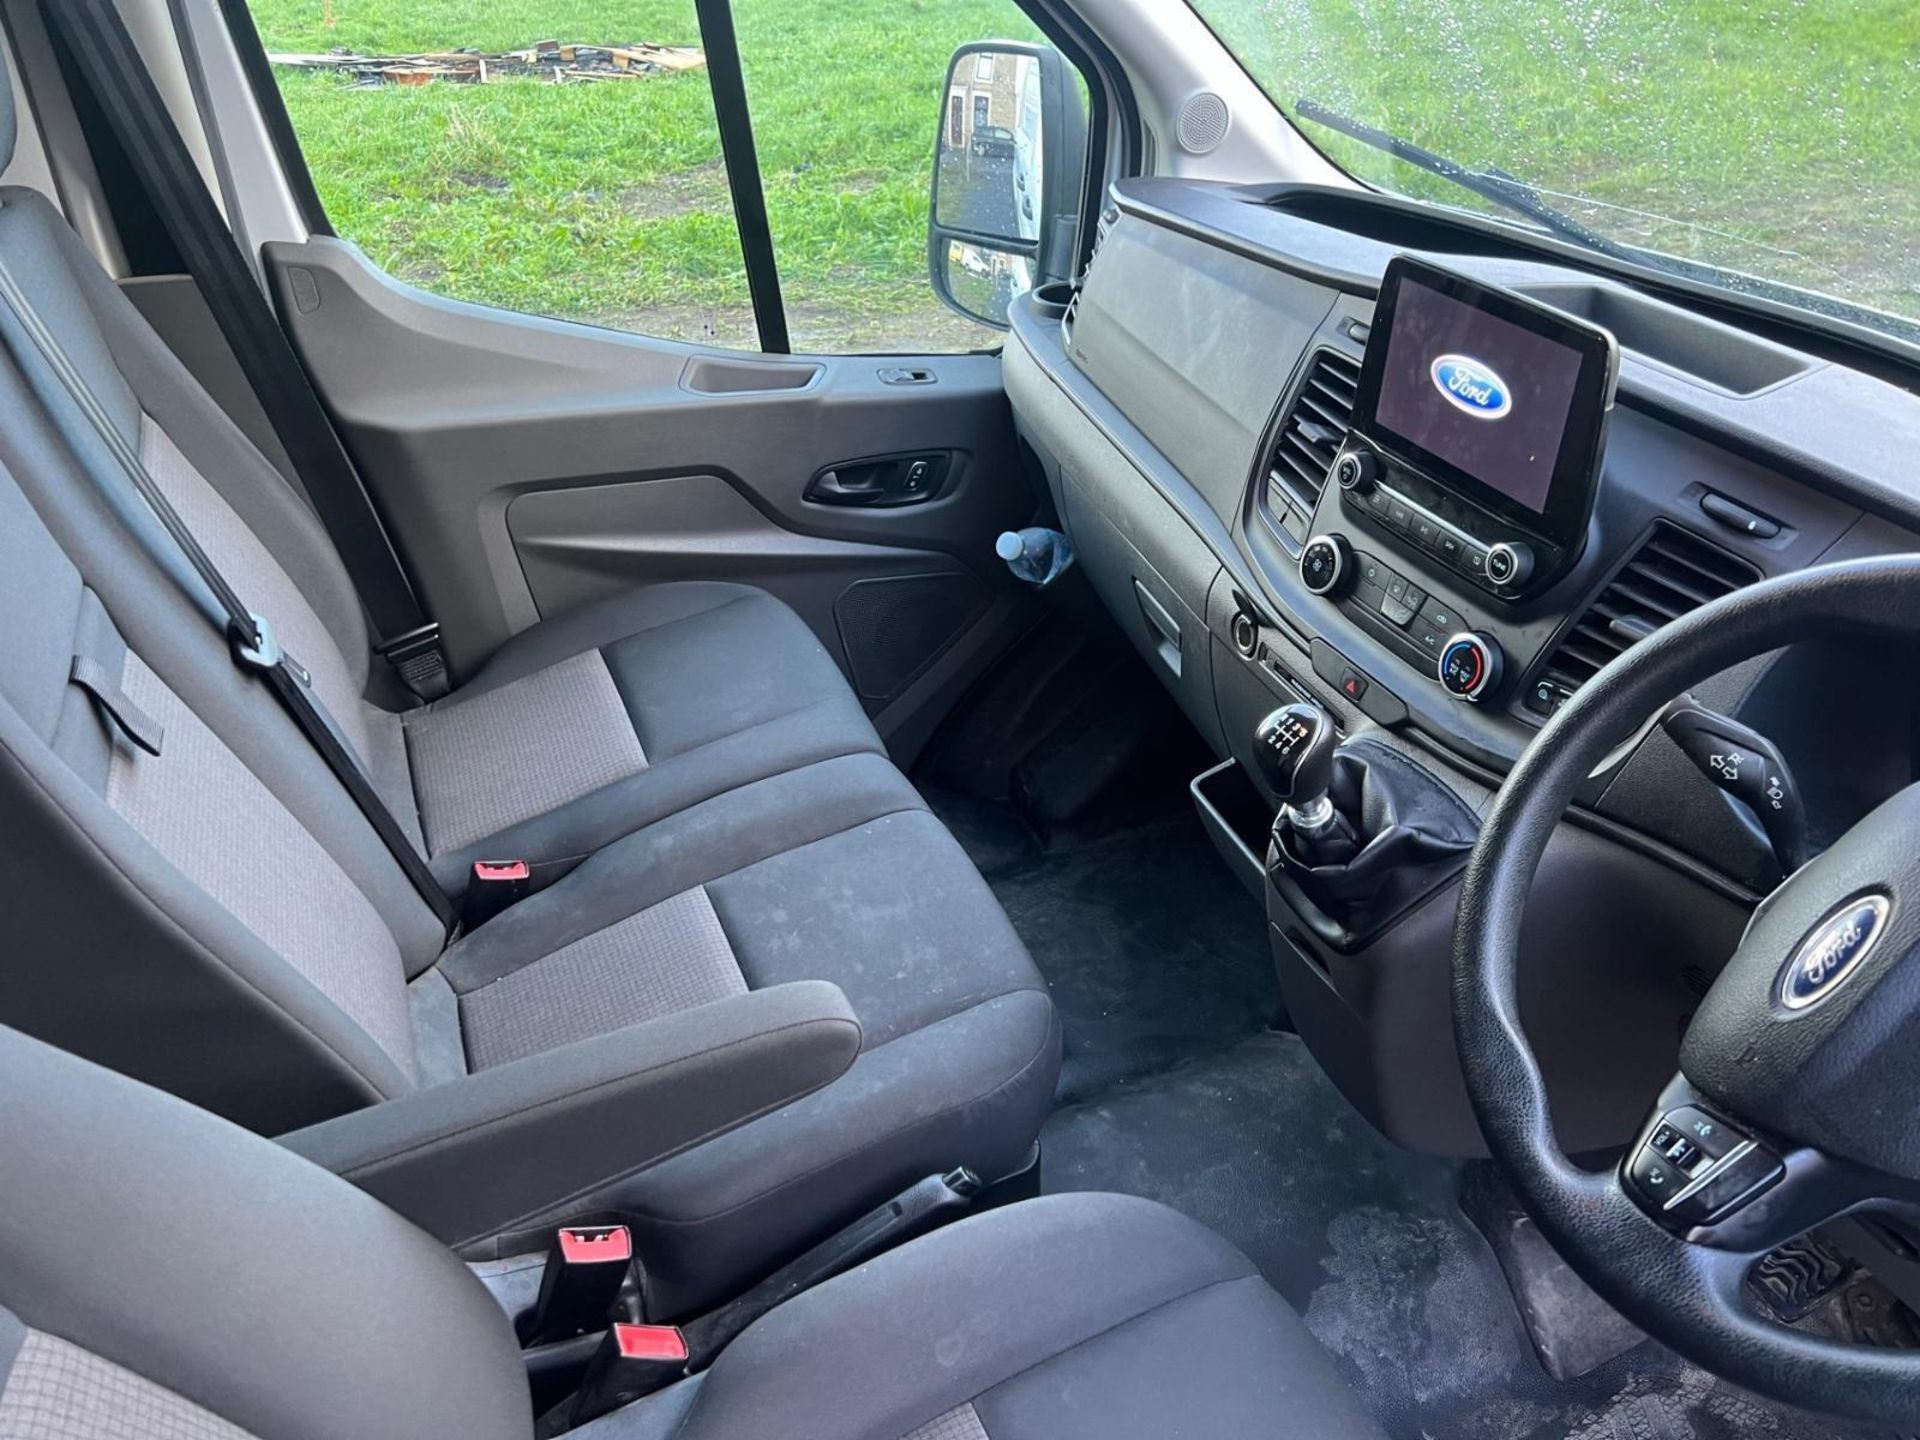 2020 FORD TRANSIT LWB L3H2 LEADER - RELIABLE AND WELL-EQUIPPED - Image 11 of 12